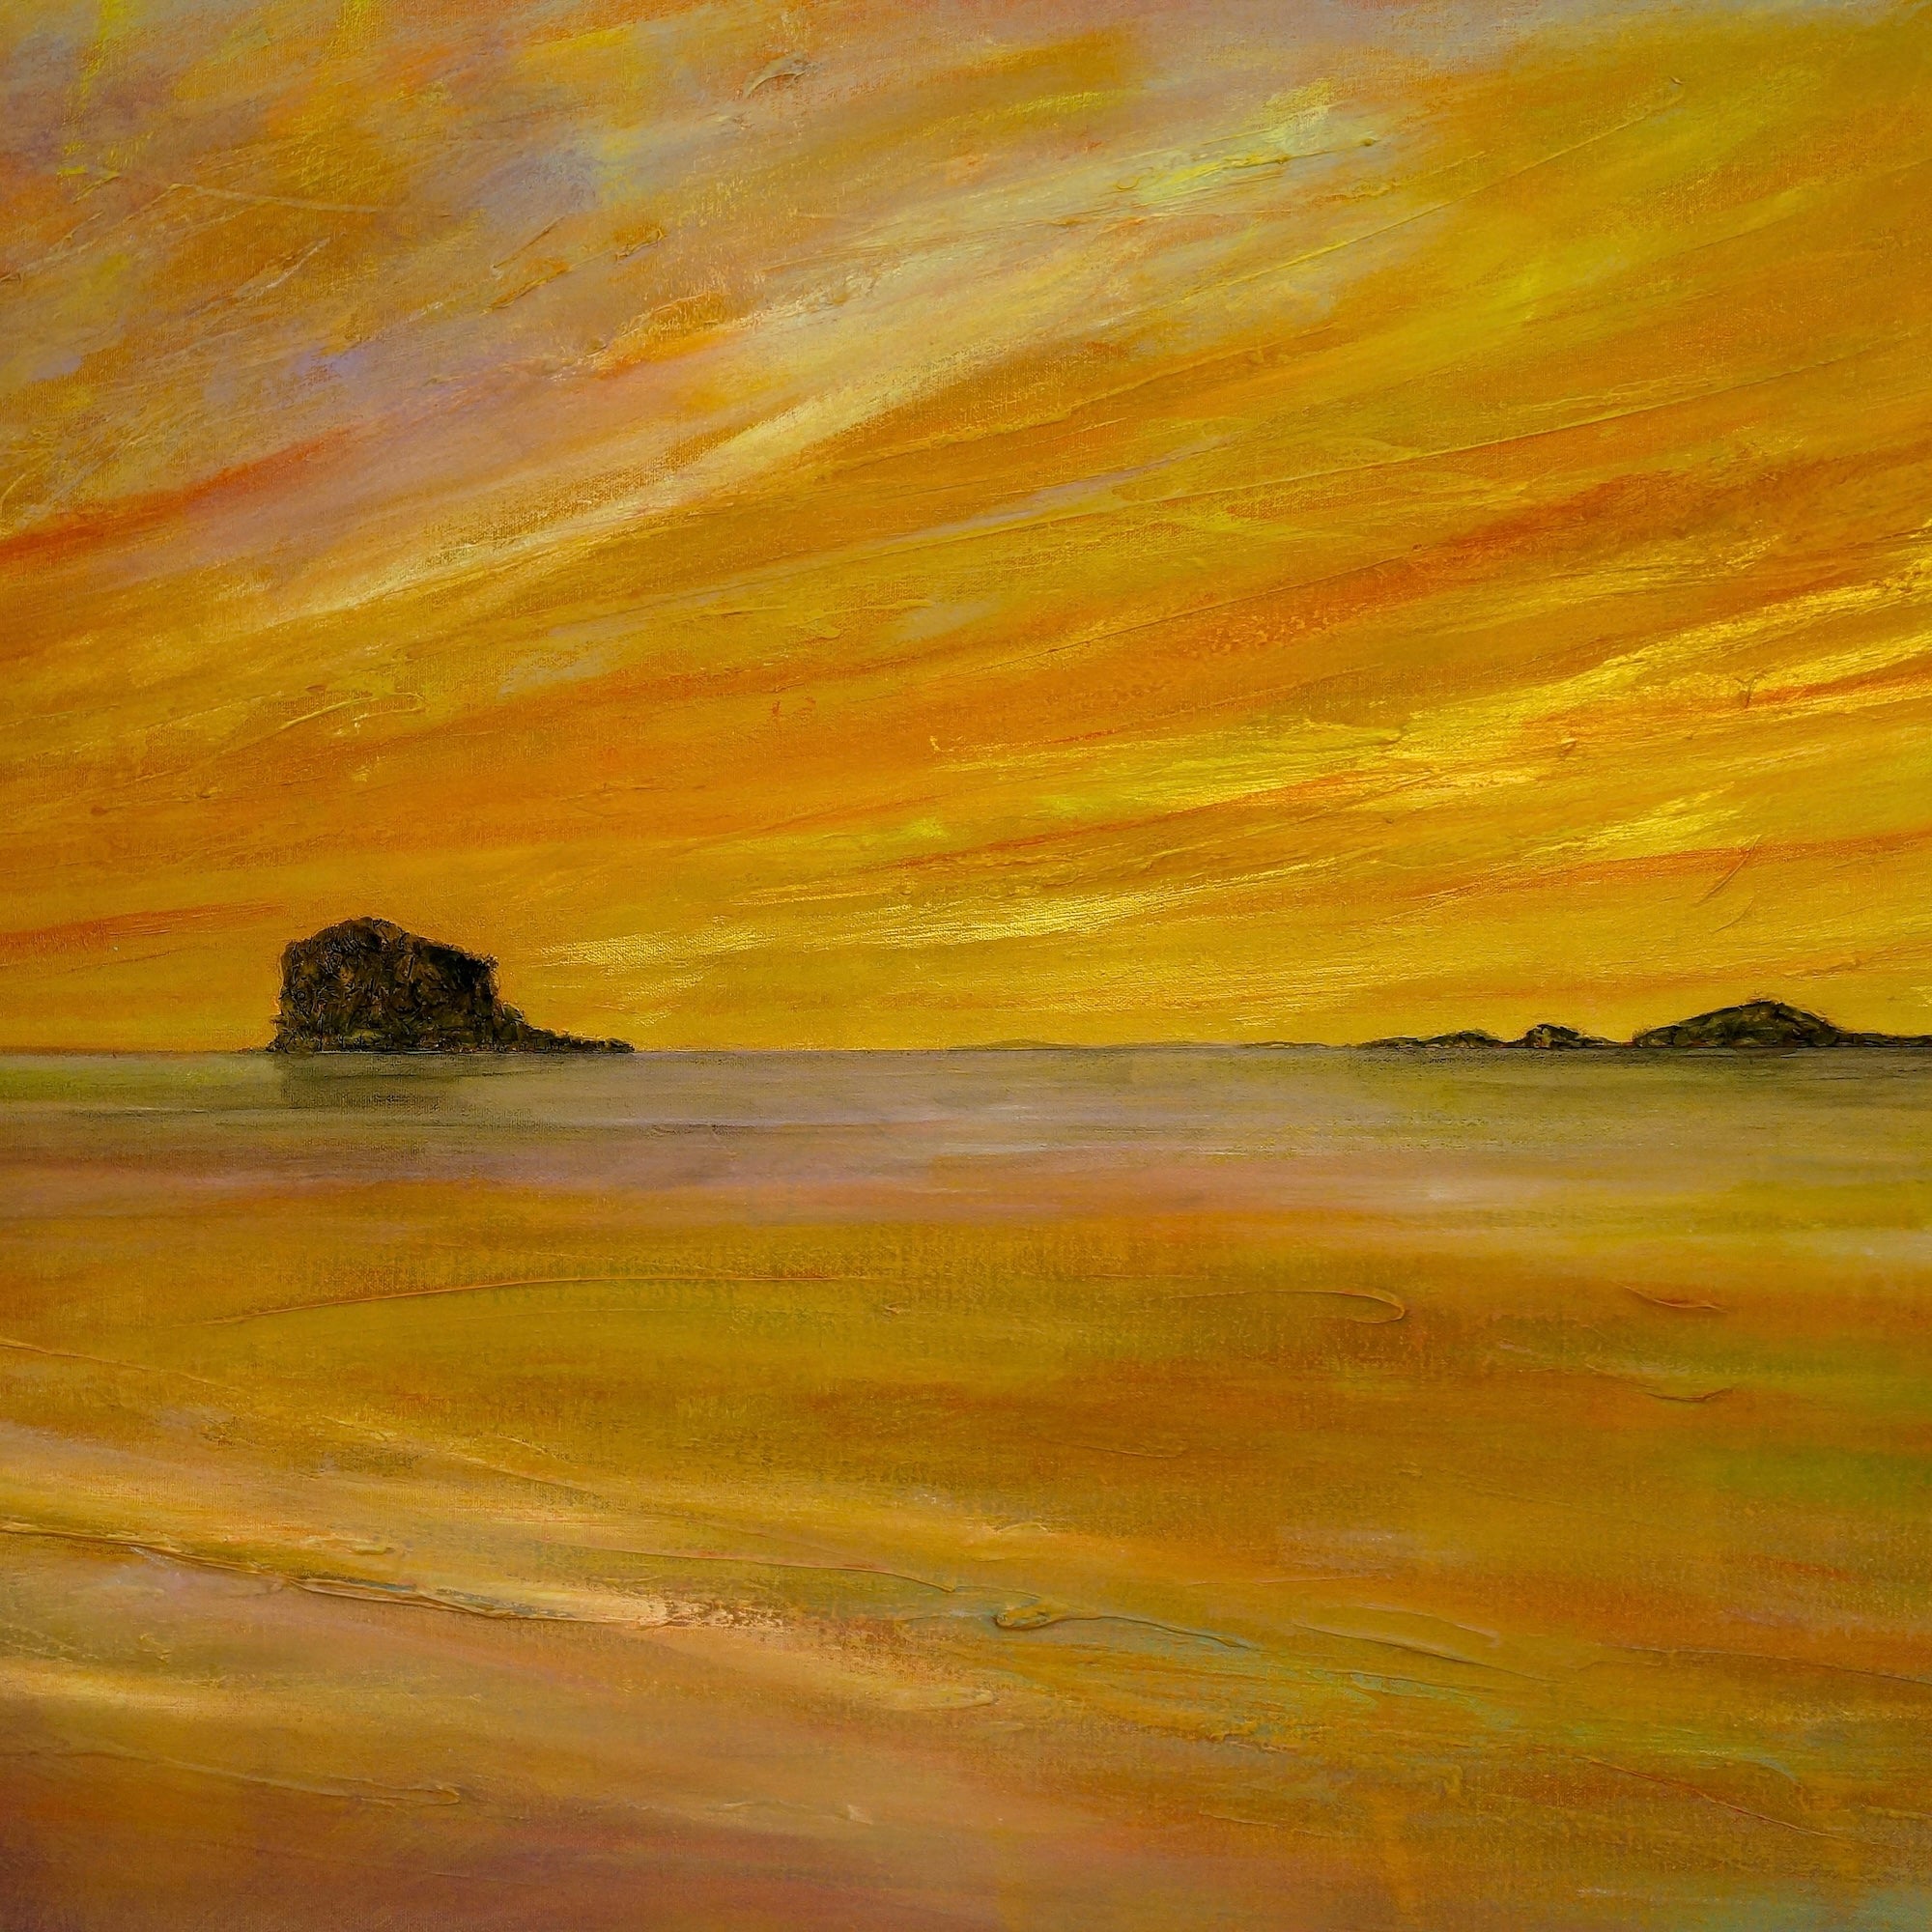 Bass Rock Dusk | Scotland In Your Pocket Art Print-Scotland In Your Pocket Framed Prints-Edinburgh & Glasgow Art Gallery-Paintings, Prints, Homeware, Art Gifts From Scotland By Scottish Artist Kevin Hunter